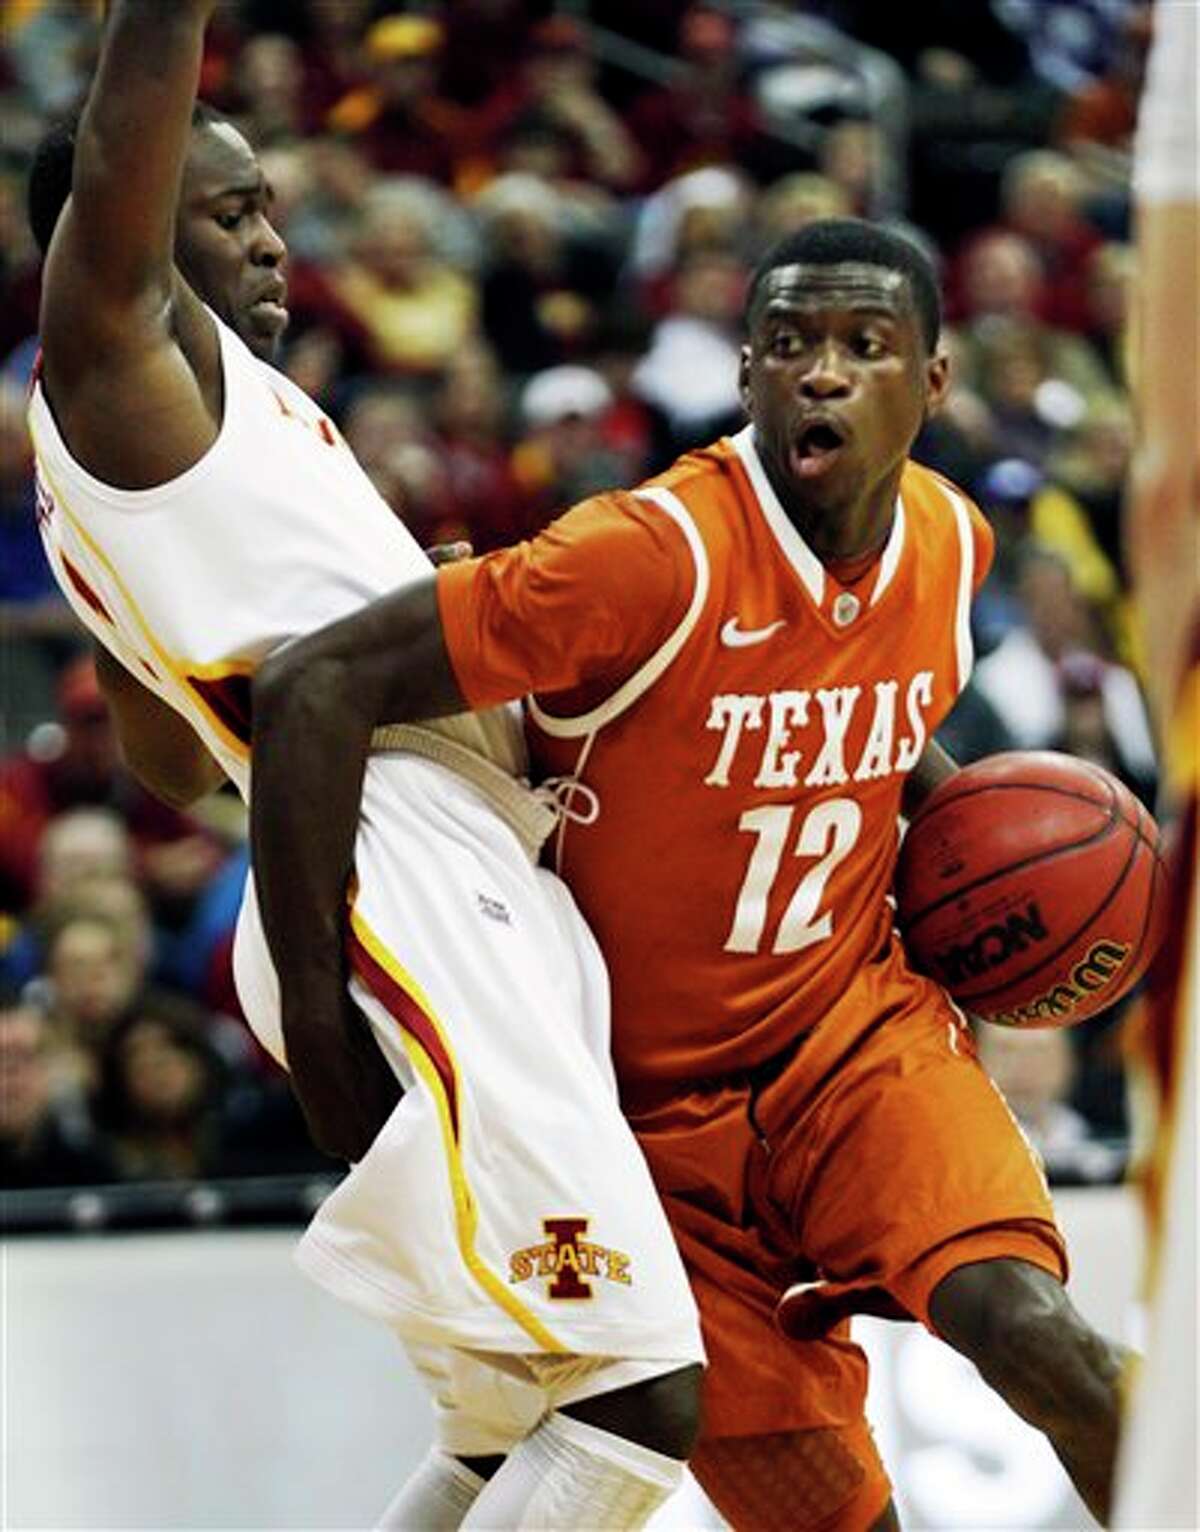 Texas guard Myck Kabongo (12) gets around Iowa State guard Bubu Palo (1) during the first half of an NCAA college basketball game in the Big 12 Basketball Tournament Thursday, March 8, 2012, in Kansas City, Mo.